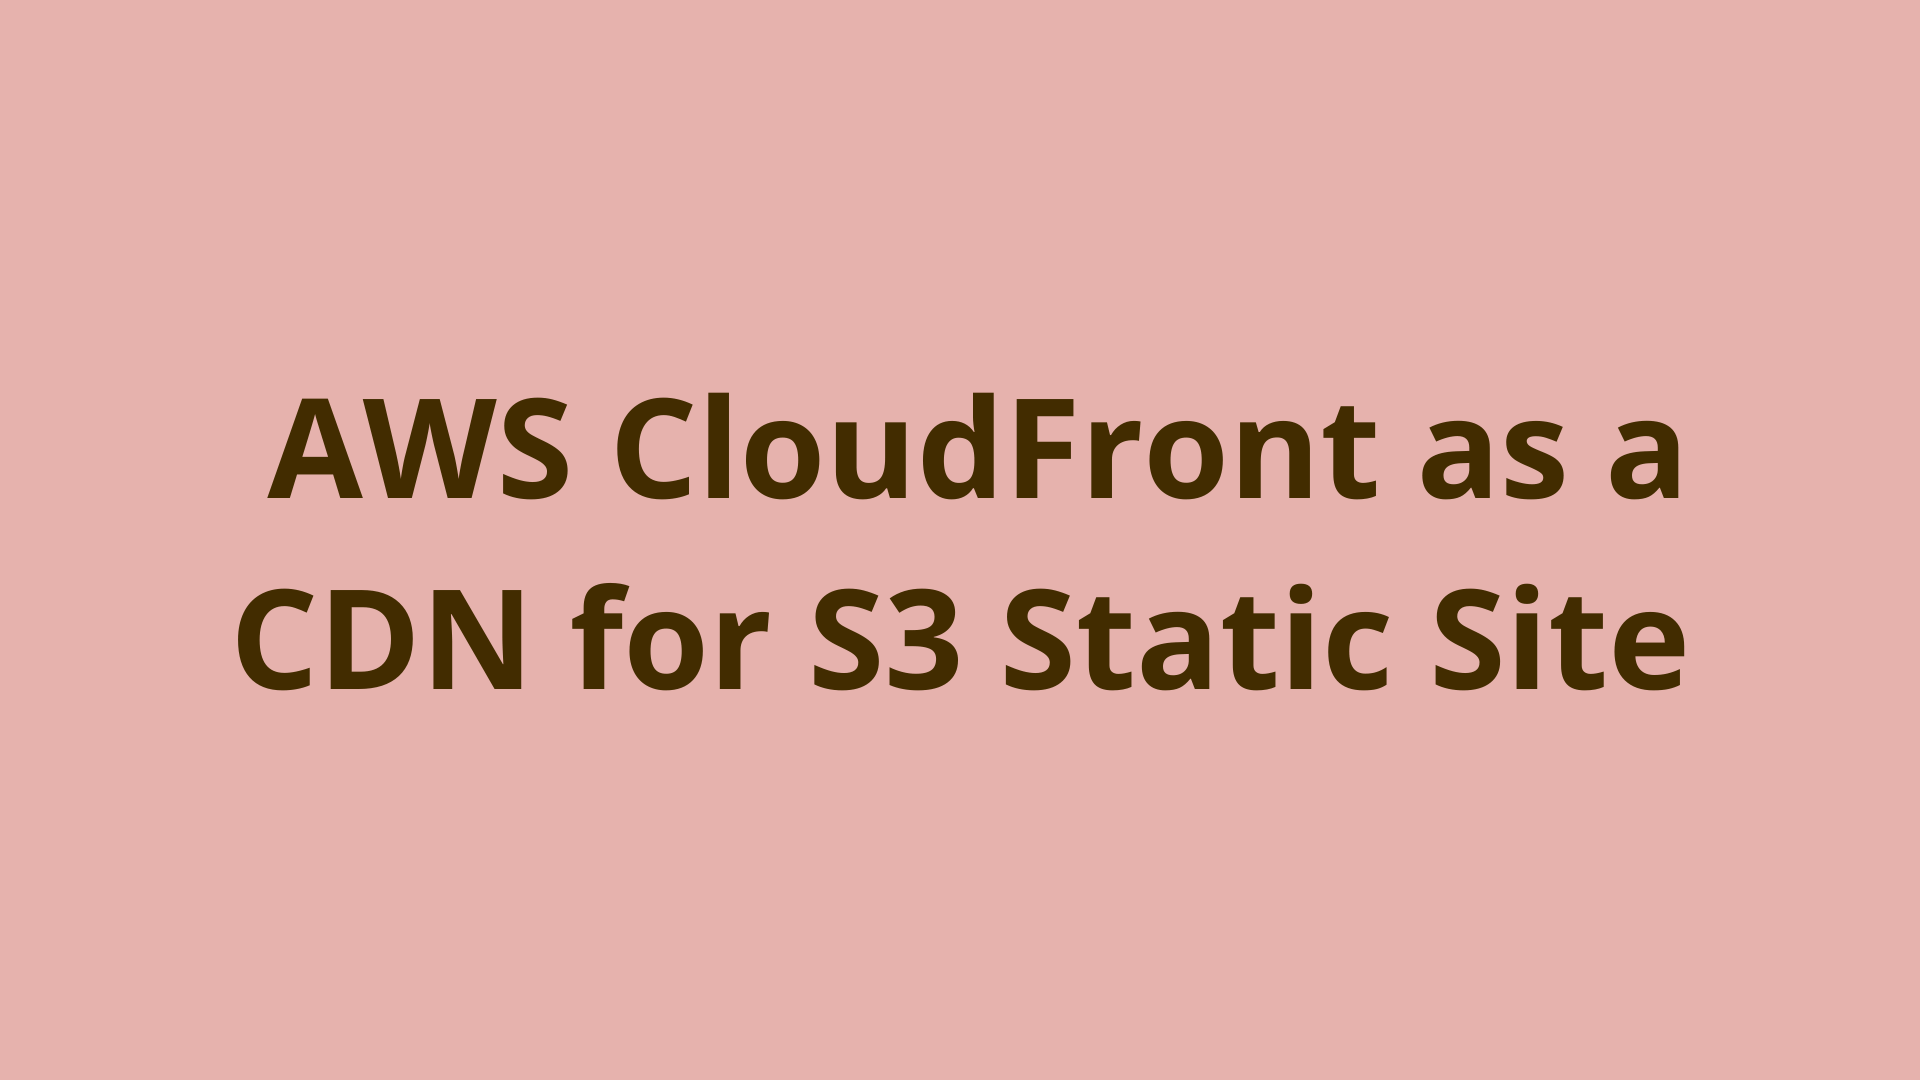 Image of Using AWS CloudFront as a CDN for an S3 Static Site